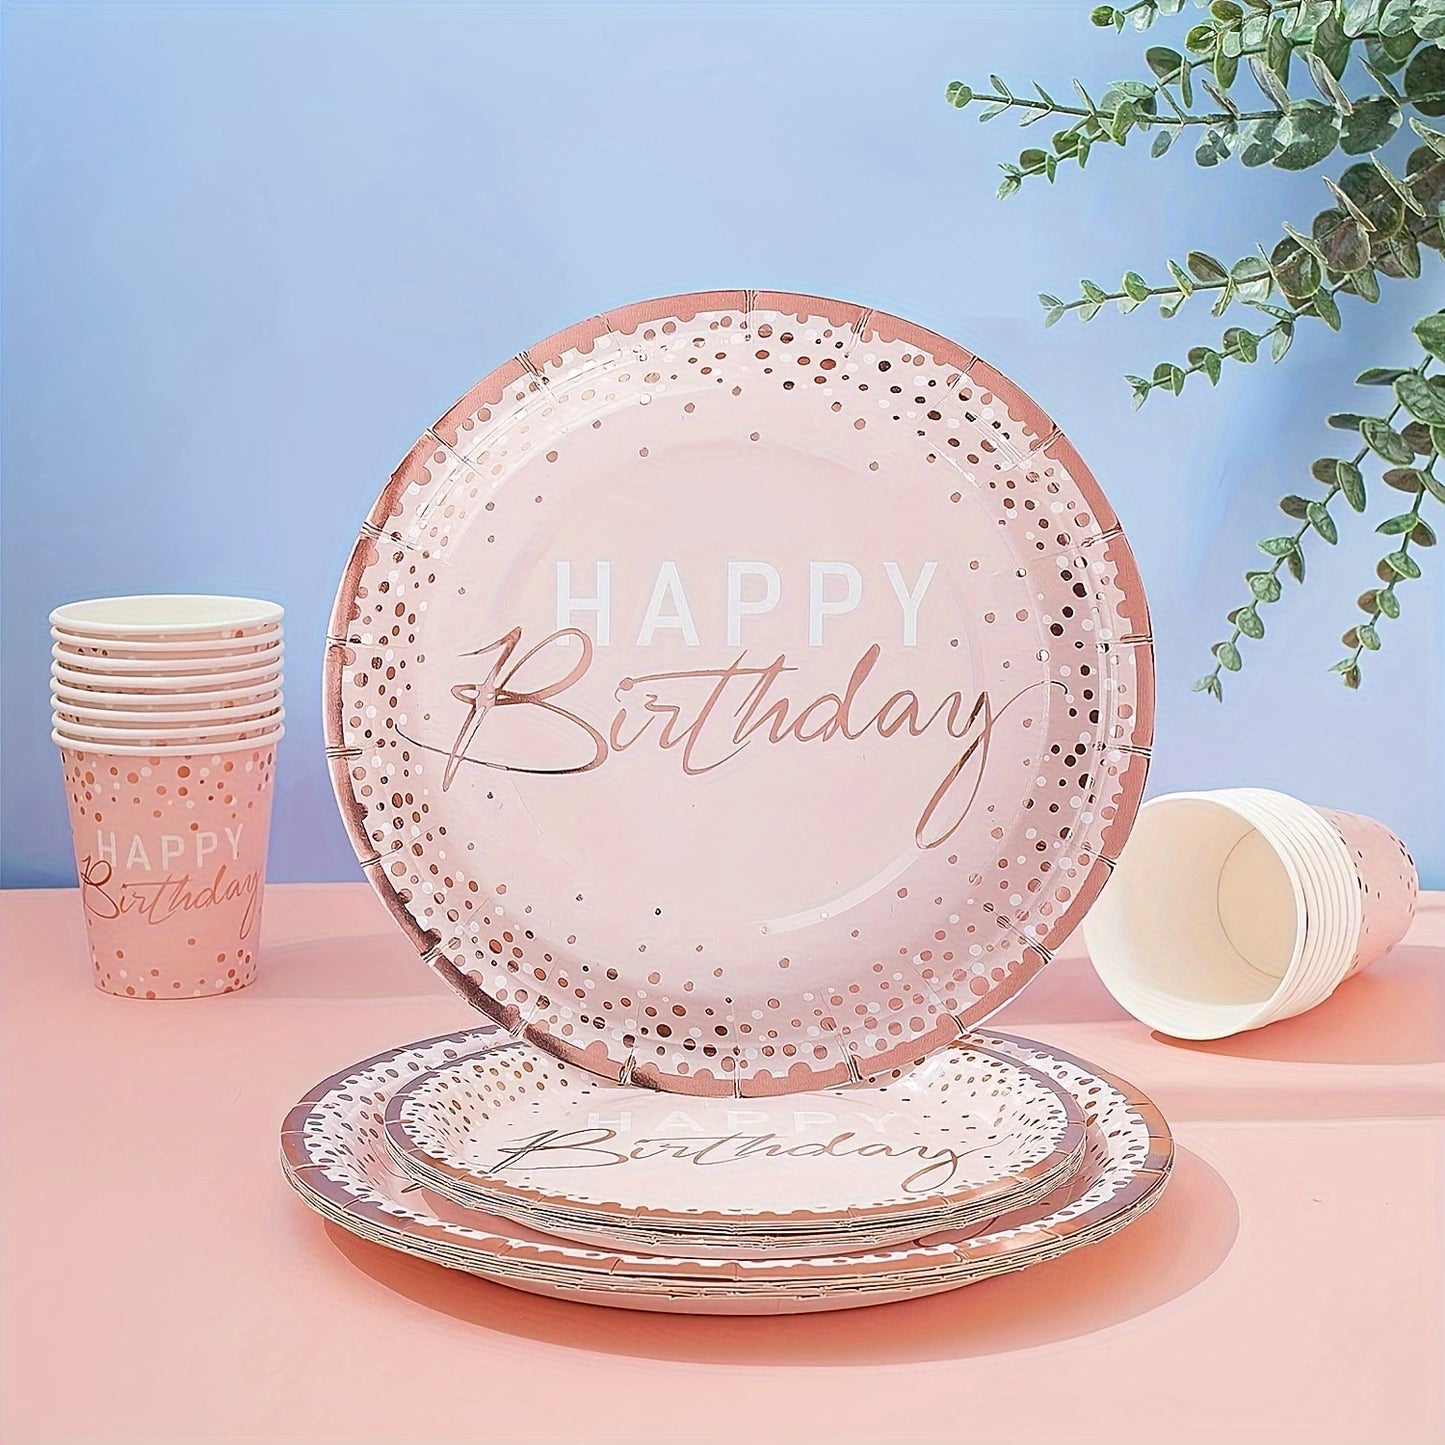 175PCS Happy Birthday Plates and Napkins Party Supplies Disposable dining plate, Paper Pink and Rose Gold Plastic Forks Knives Spoons Serve 25 Guests for Girl Bee's to Find